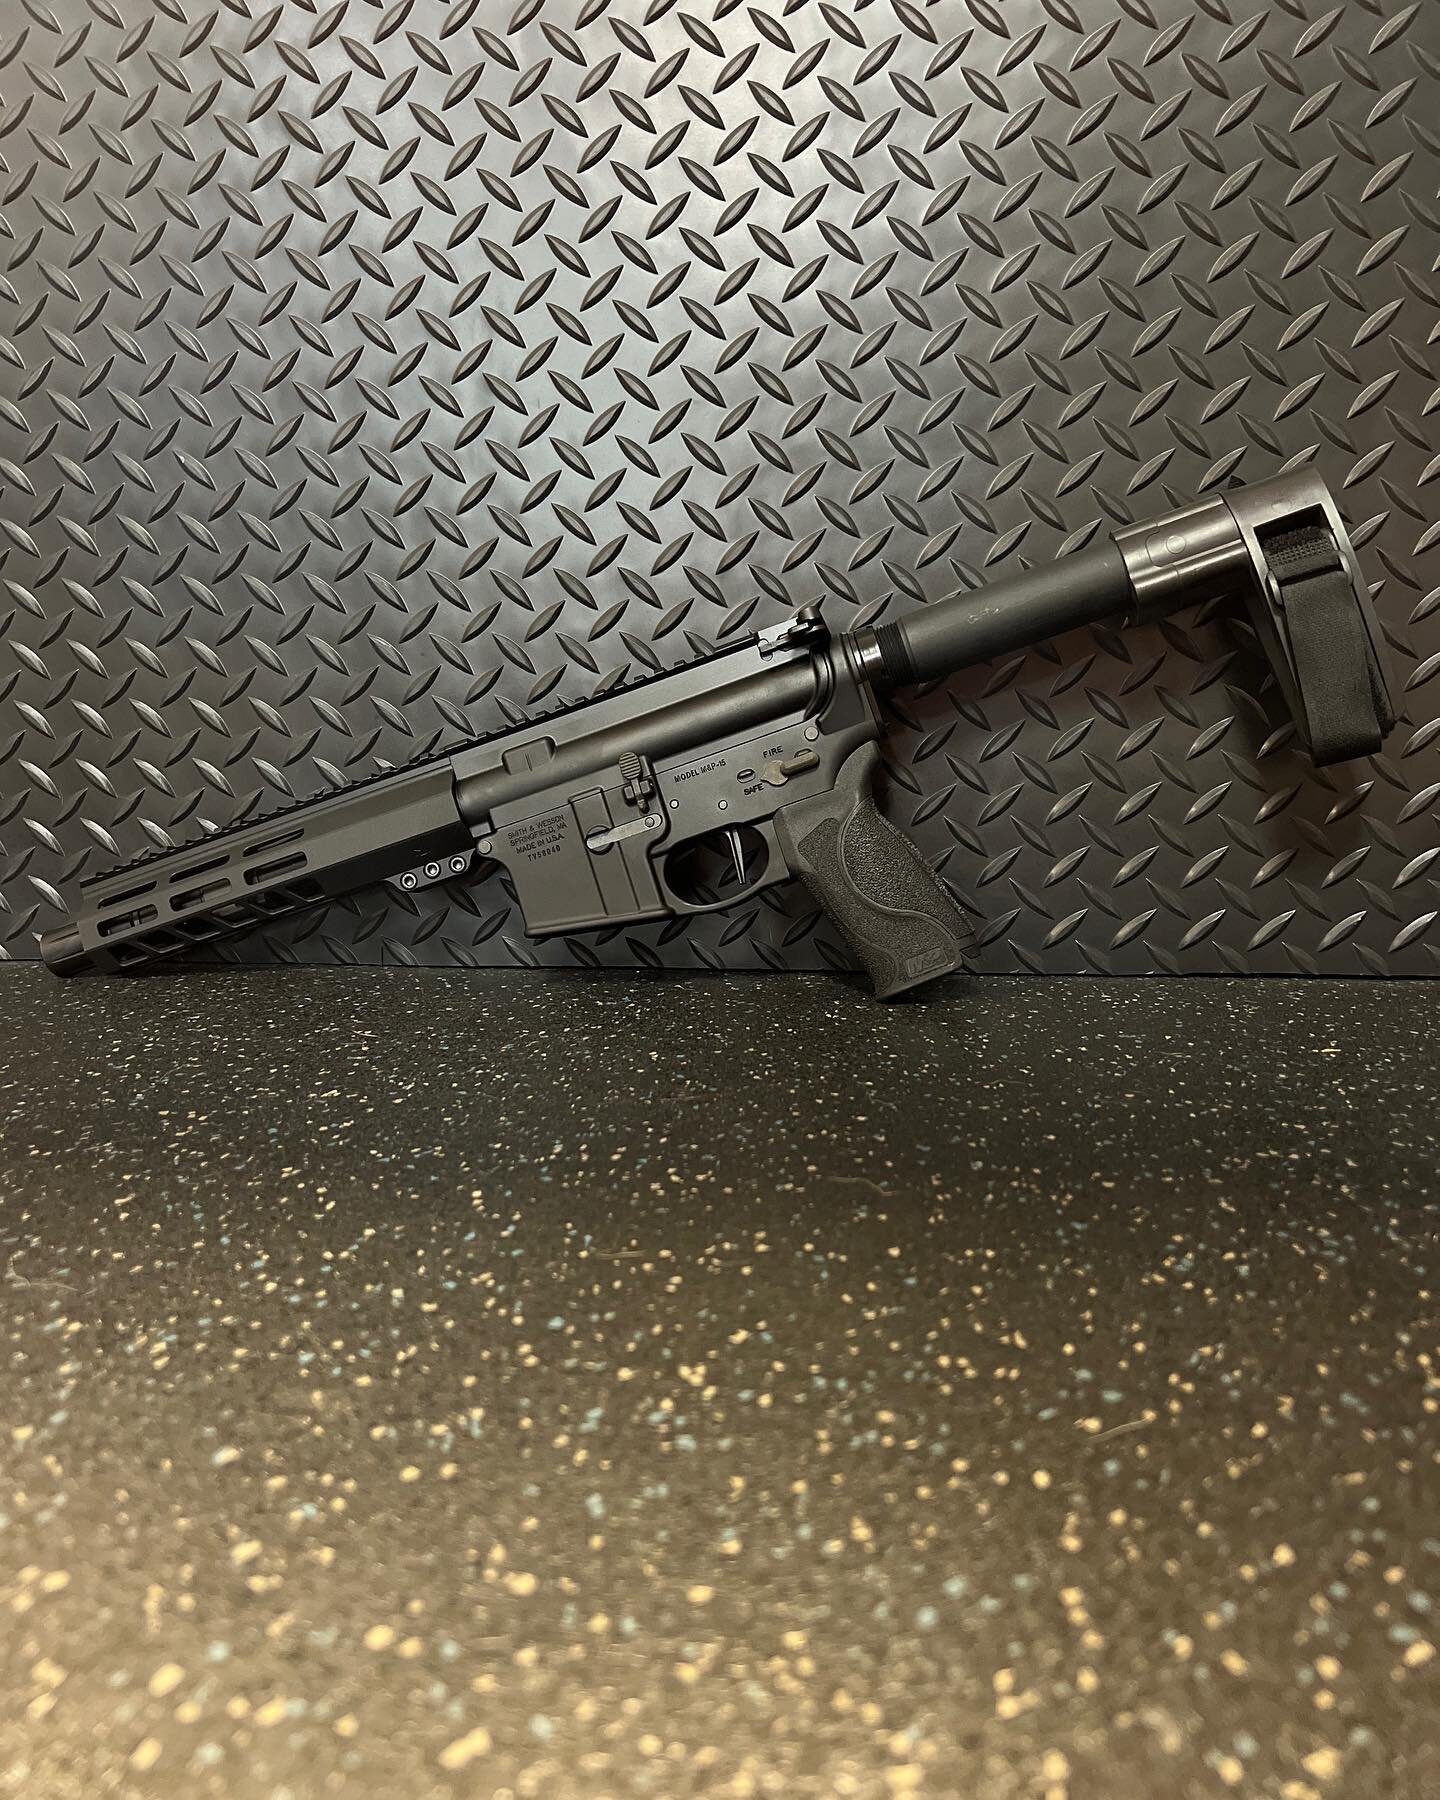 Super compact Smith &amp; Wesson M&amp;P 15 pistol just arrived. It includes:
-7.75&rdquo; Free Float Handguard (7.5&rdquo; Barrel)
- Flat Faced Mil-Spec Trigger
-Fixed SB Tactical Arm Brace
-Blast Diverting Muzzle Device
-Aggressively Textured Grip 